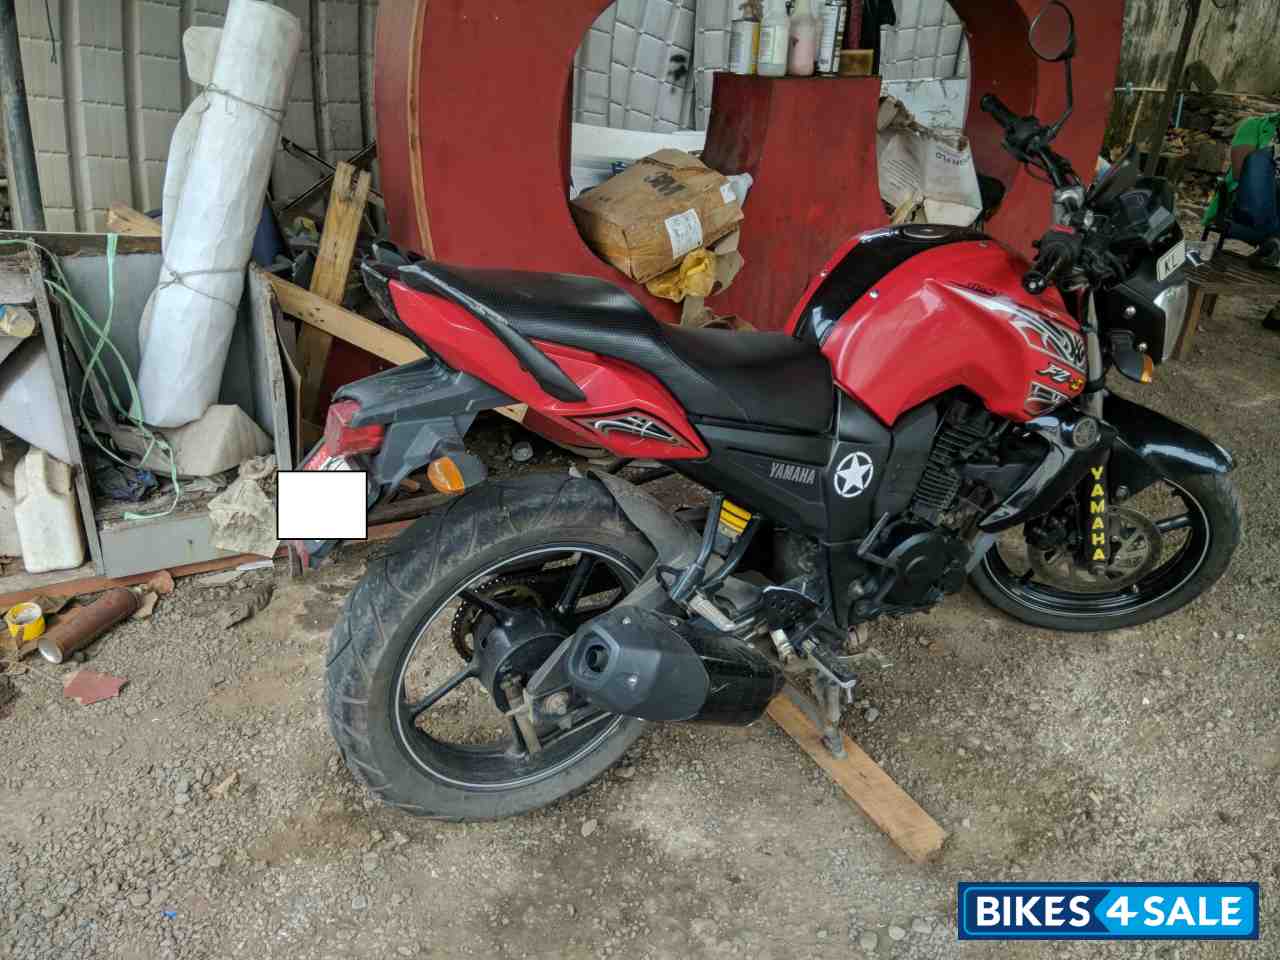 Used 2016 model Yamaha FZ16 for sale in Ernakulam. ID 193362. Red ...